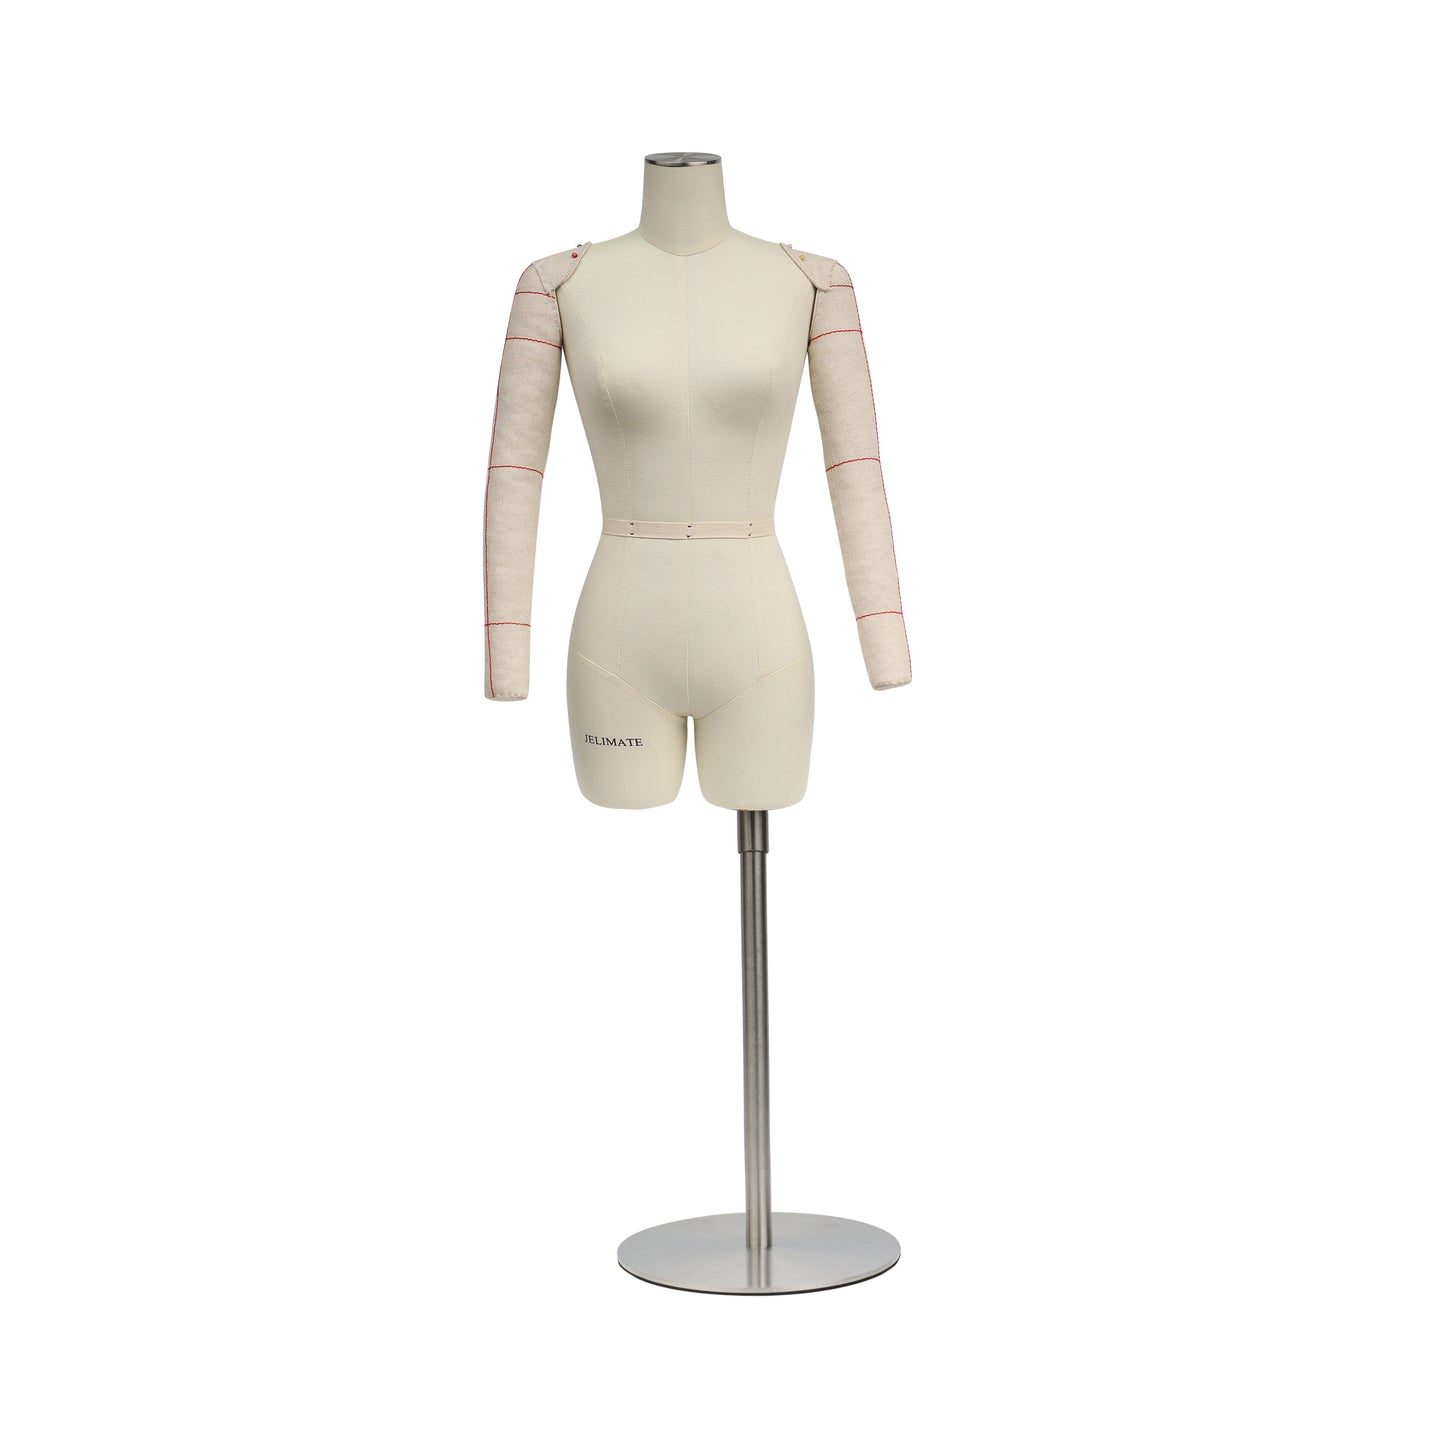 JMSIZE10 Half Scale Female Dress Form For Pattern Making,1/2 Scale Miniature Sewing Mannequin for Women,Mini Tailor Mannequin for Fashion Designer Fashion School Draping Mannequin